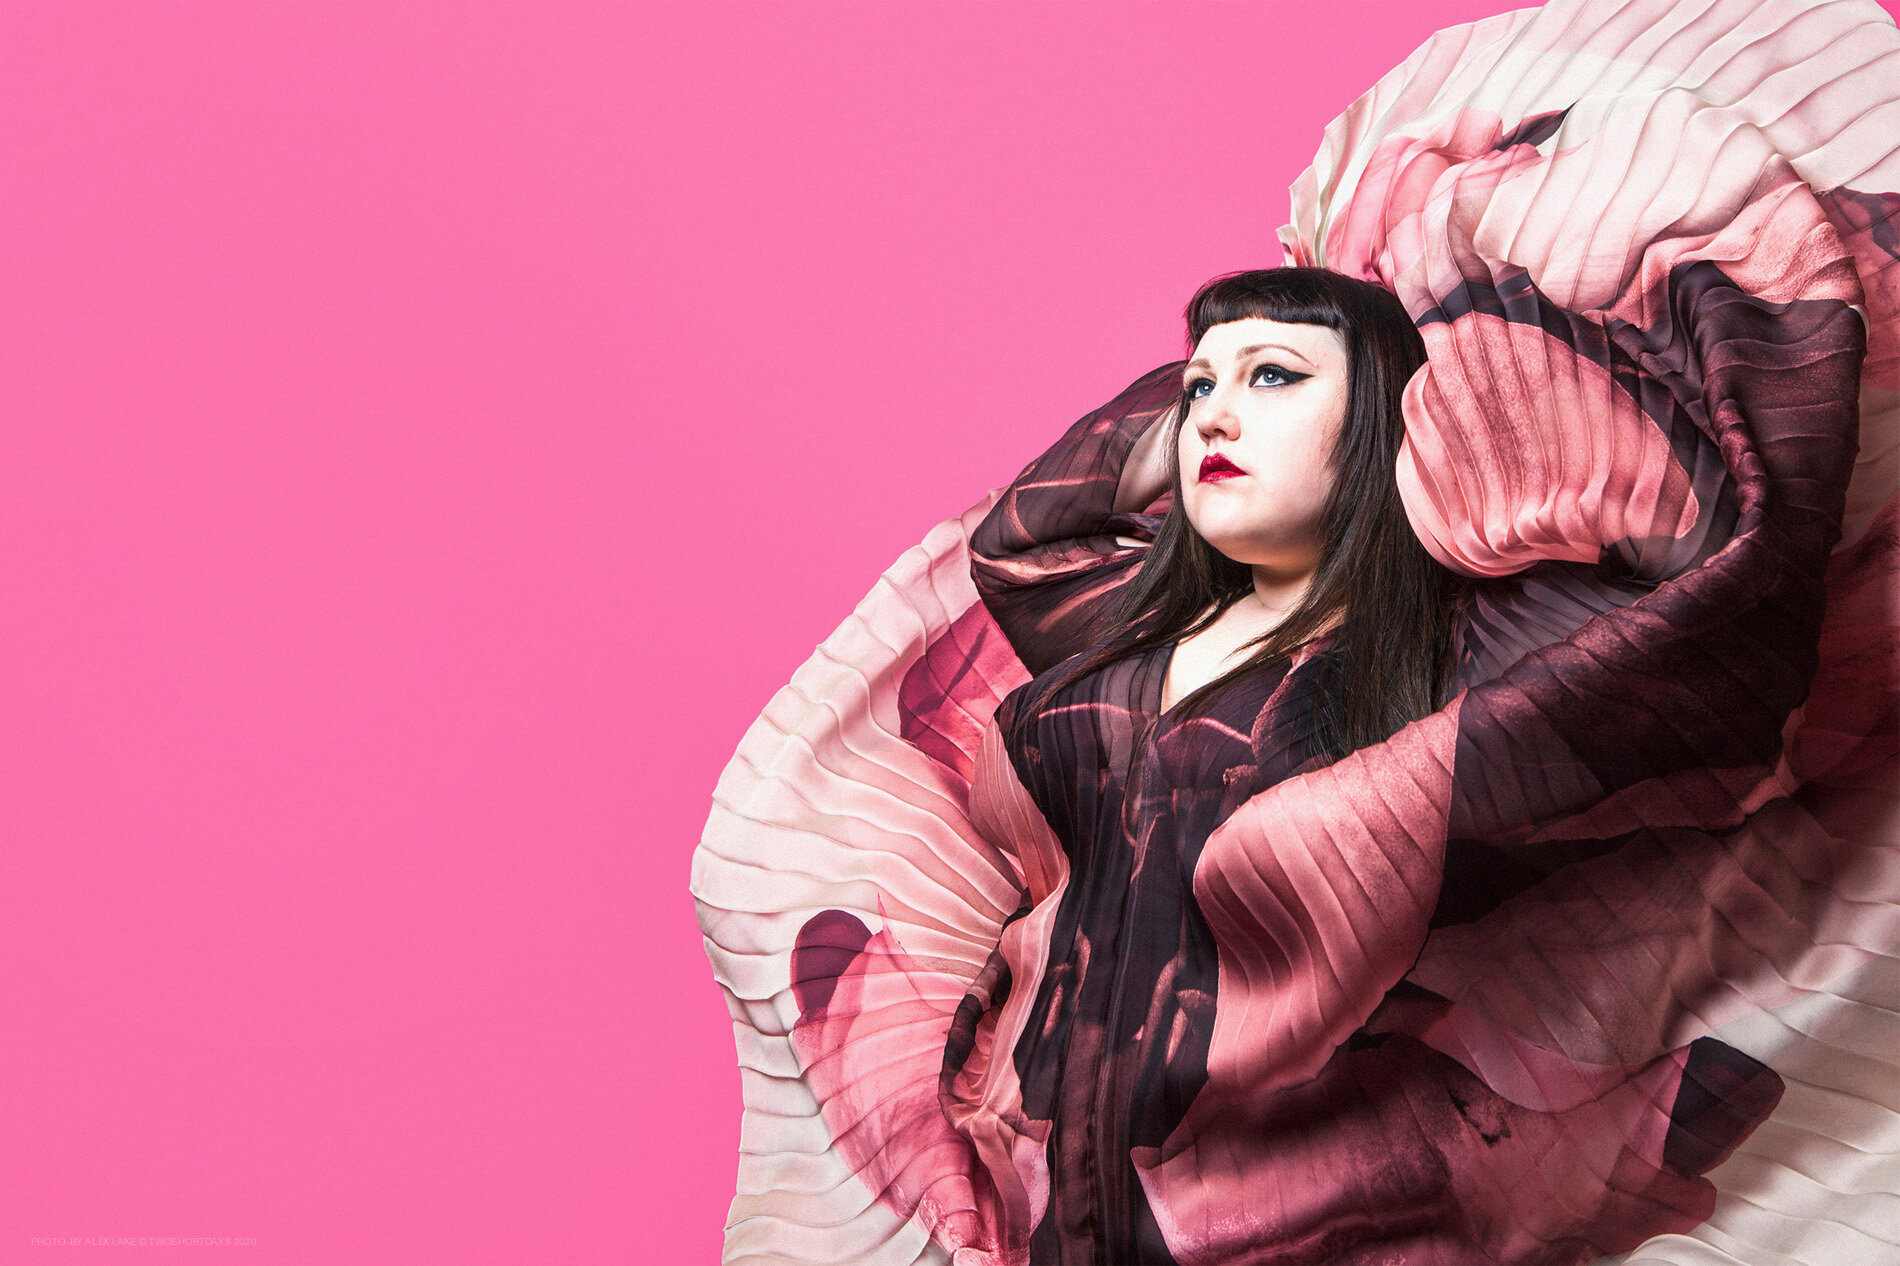 beth_ditto_photography_copyright_ALEX_LAKE_do_not_reproduce_without_permission_TWOSHORTDAYS.jpg